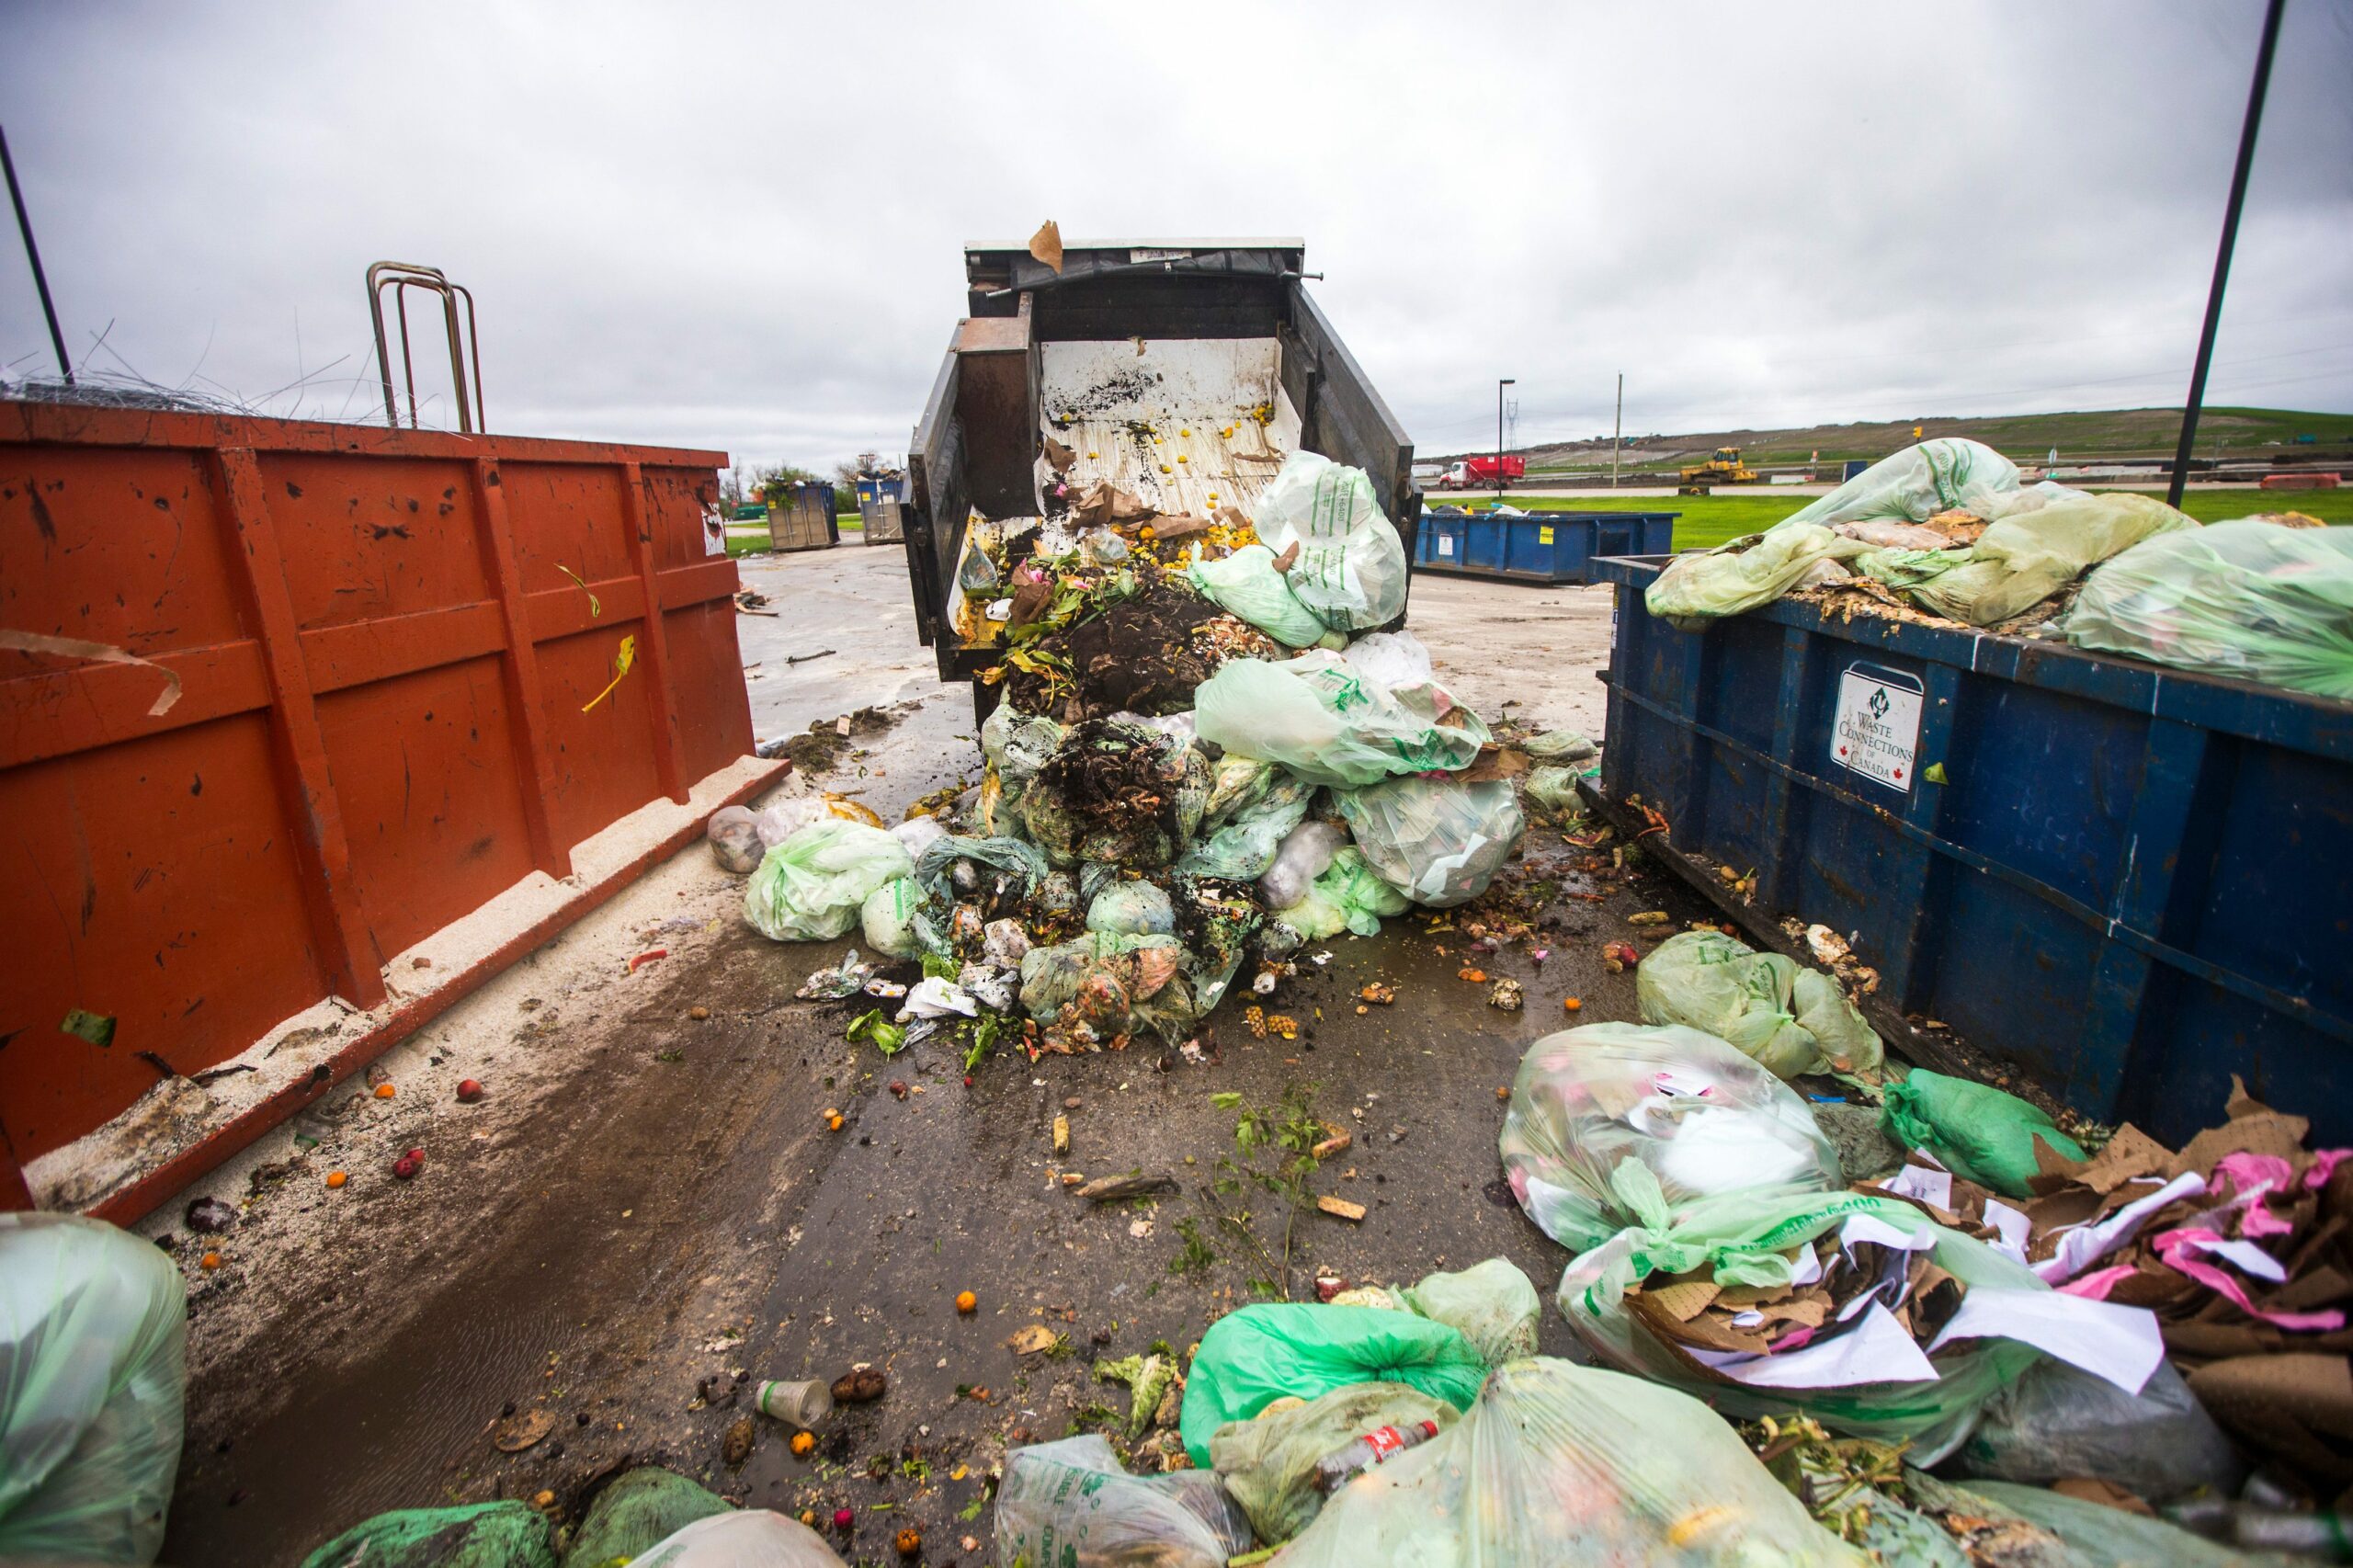 Compost in green bags tips out the back of a semi truck at a Winnipeg landfill